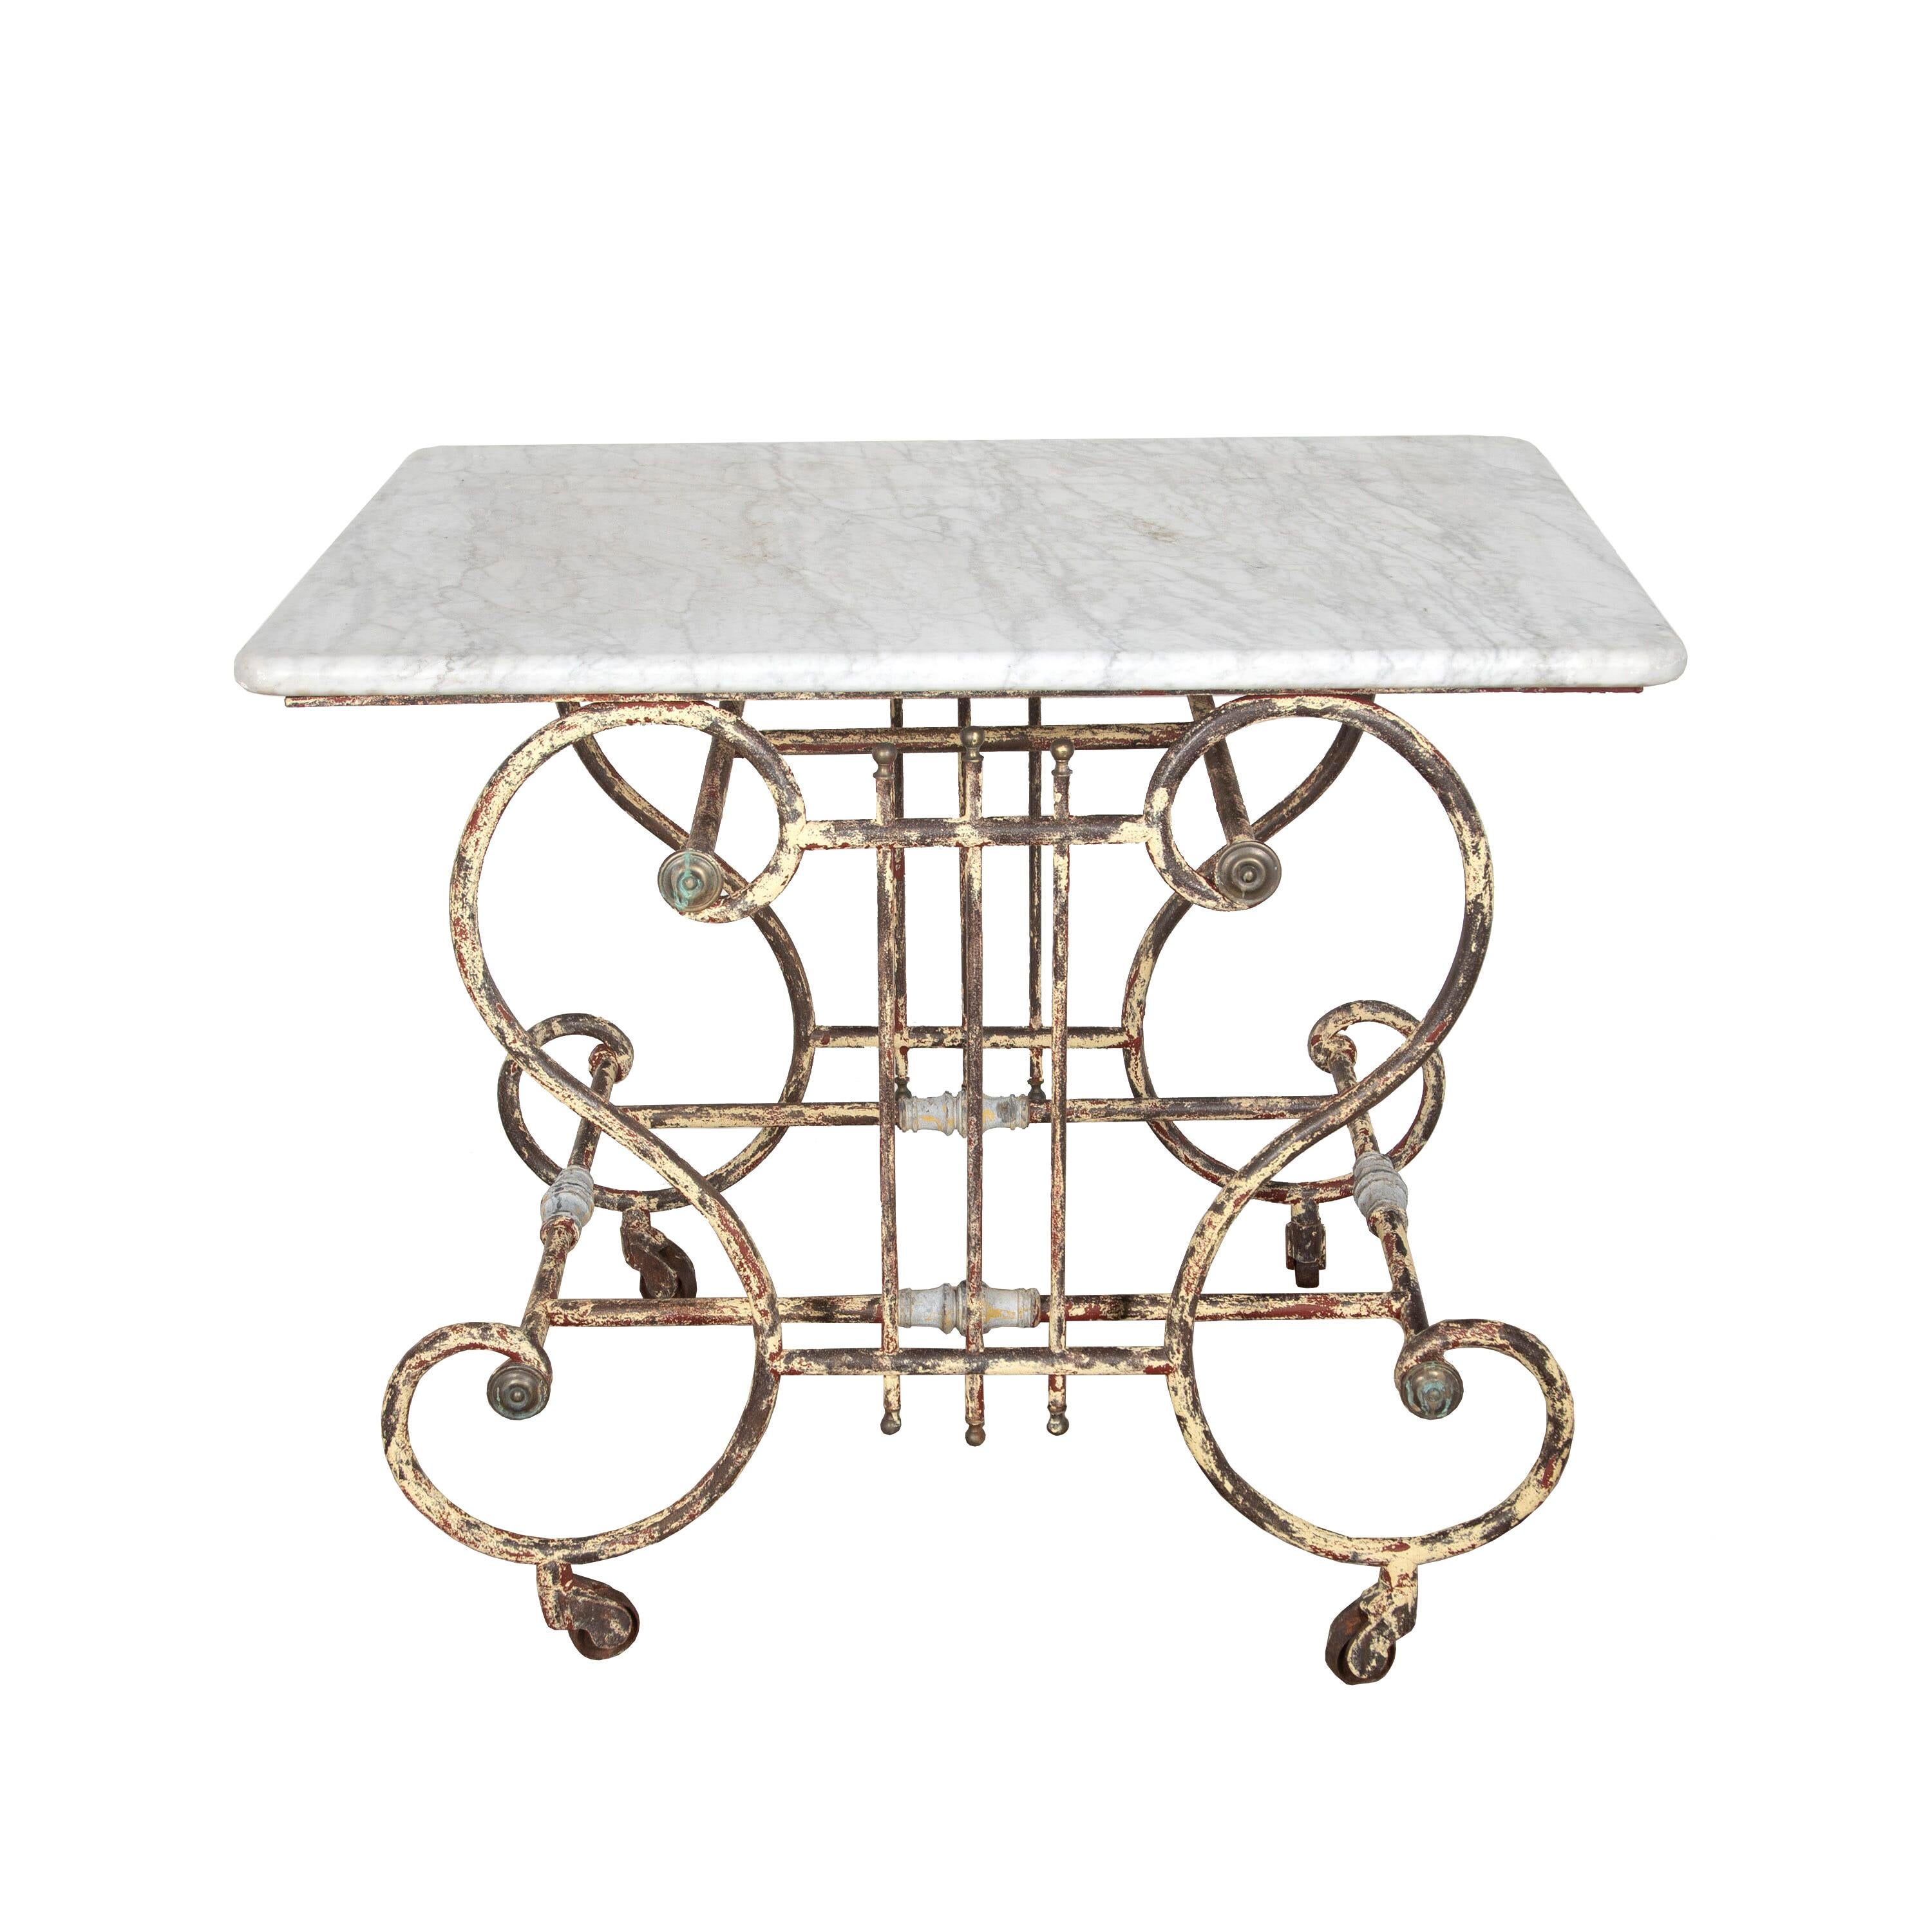 19th century French iron patisserie table with a decorative base in the shape of a lyre. This piece features a time worn patina, an original marble top.